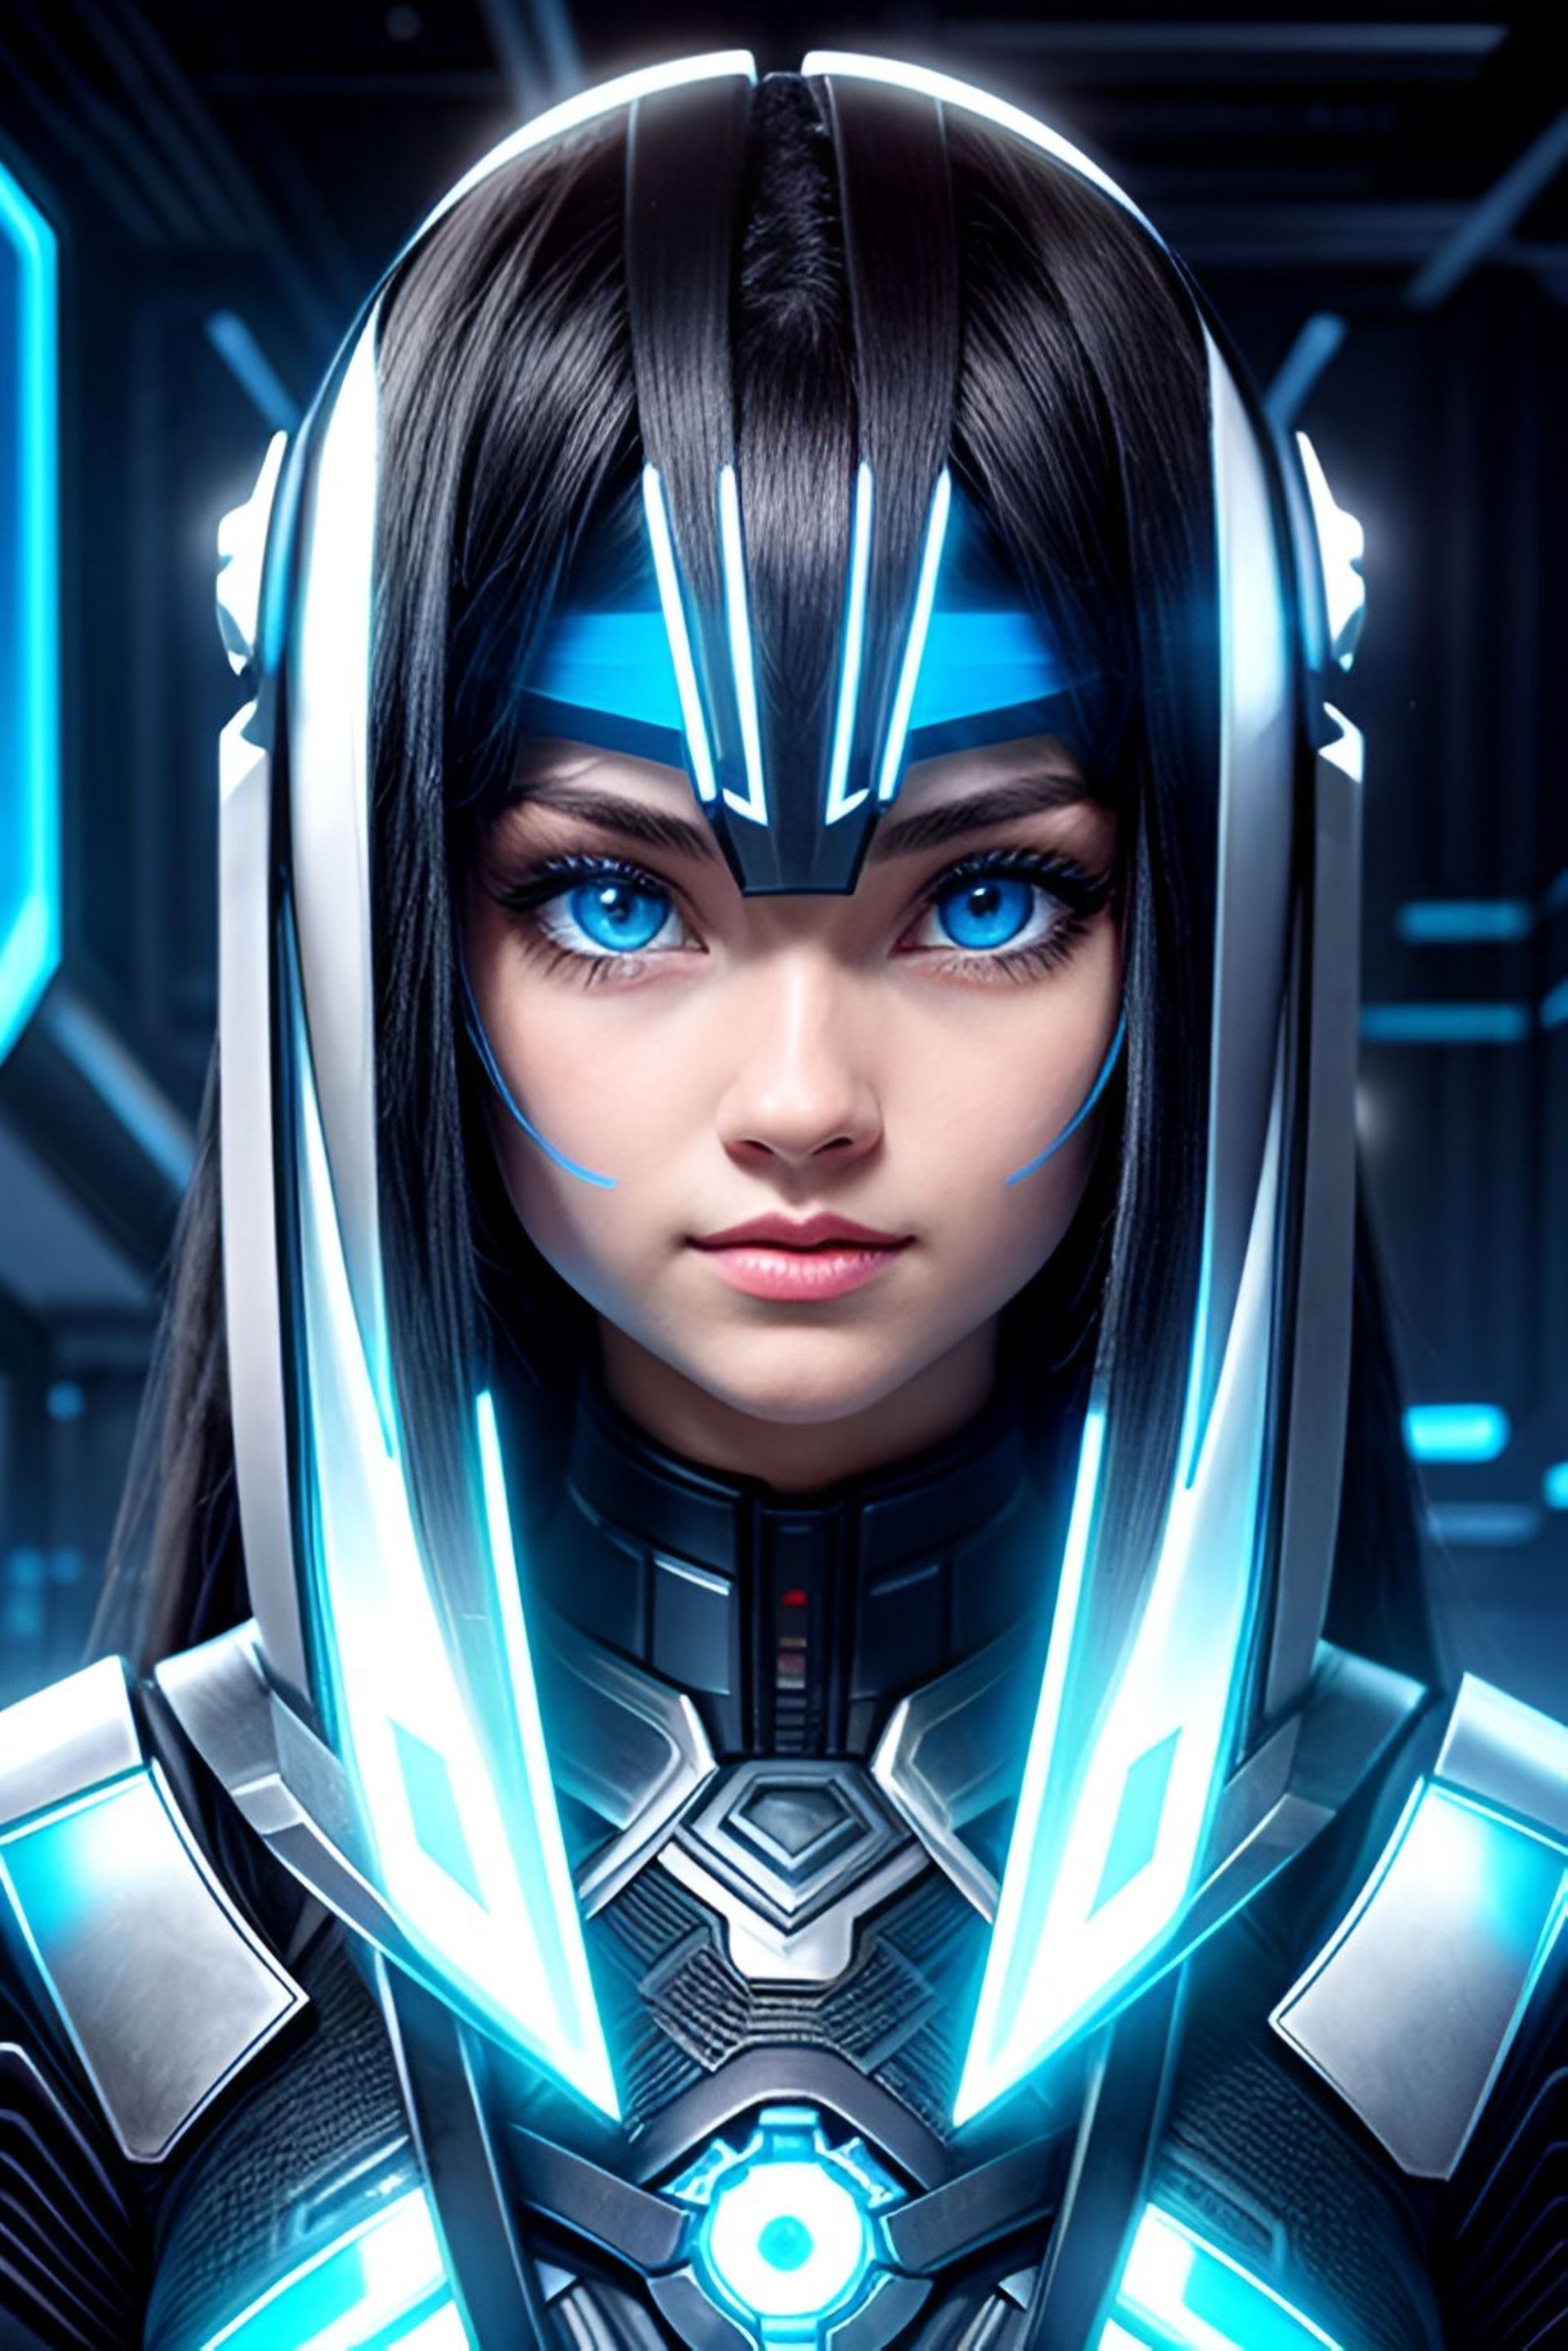 A girl, in power armor, with blue eyes.